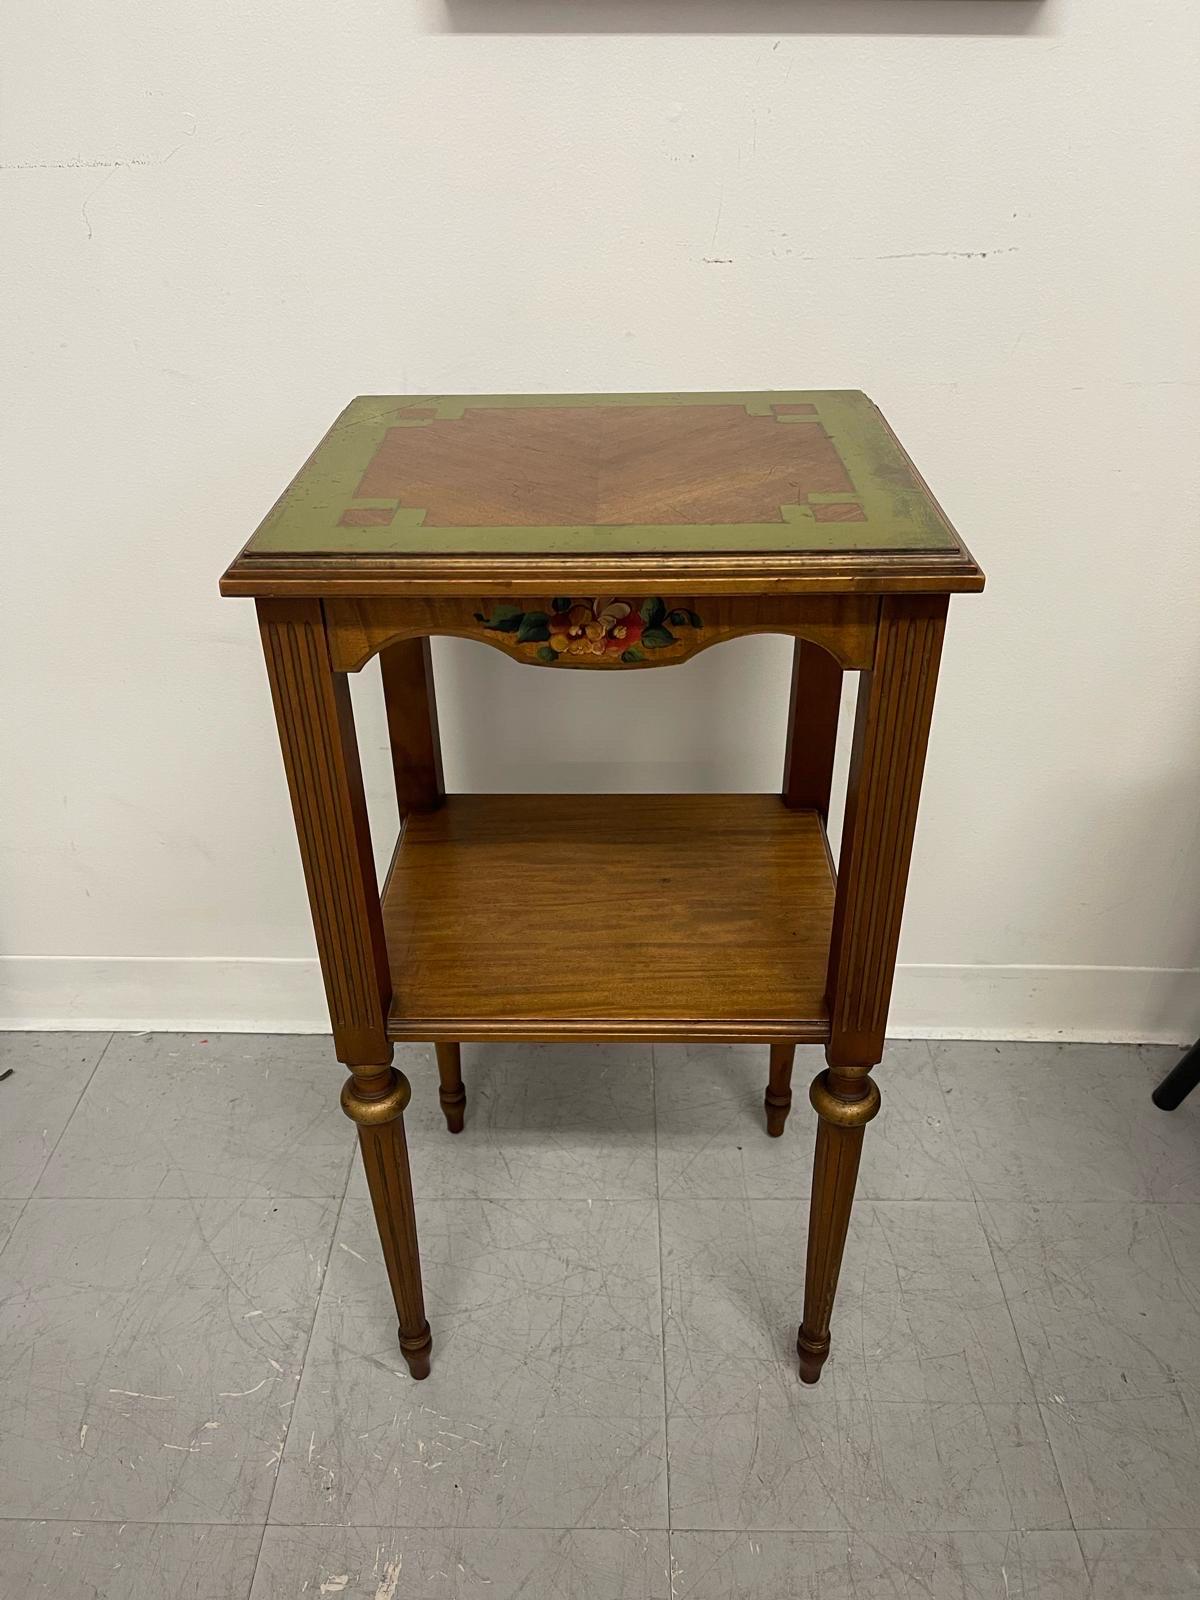 This Table has Painted Floral Accents and Green Painted Top. Beautiful Petina Shows Age.?Turned Wood Legs. Vintage Condition Consistent with Age as Pictured.

Dimensions. 15 W ; 13 D ; 29 H